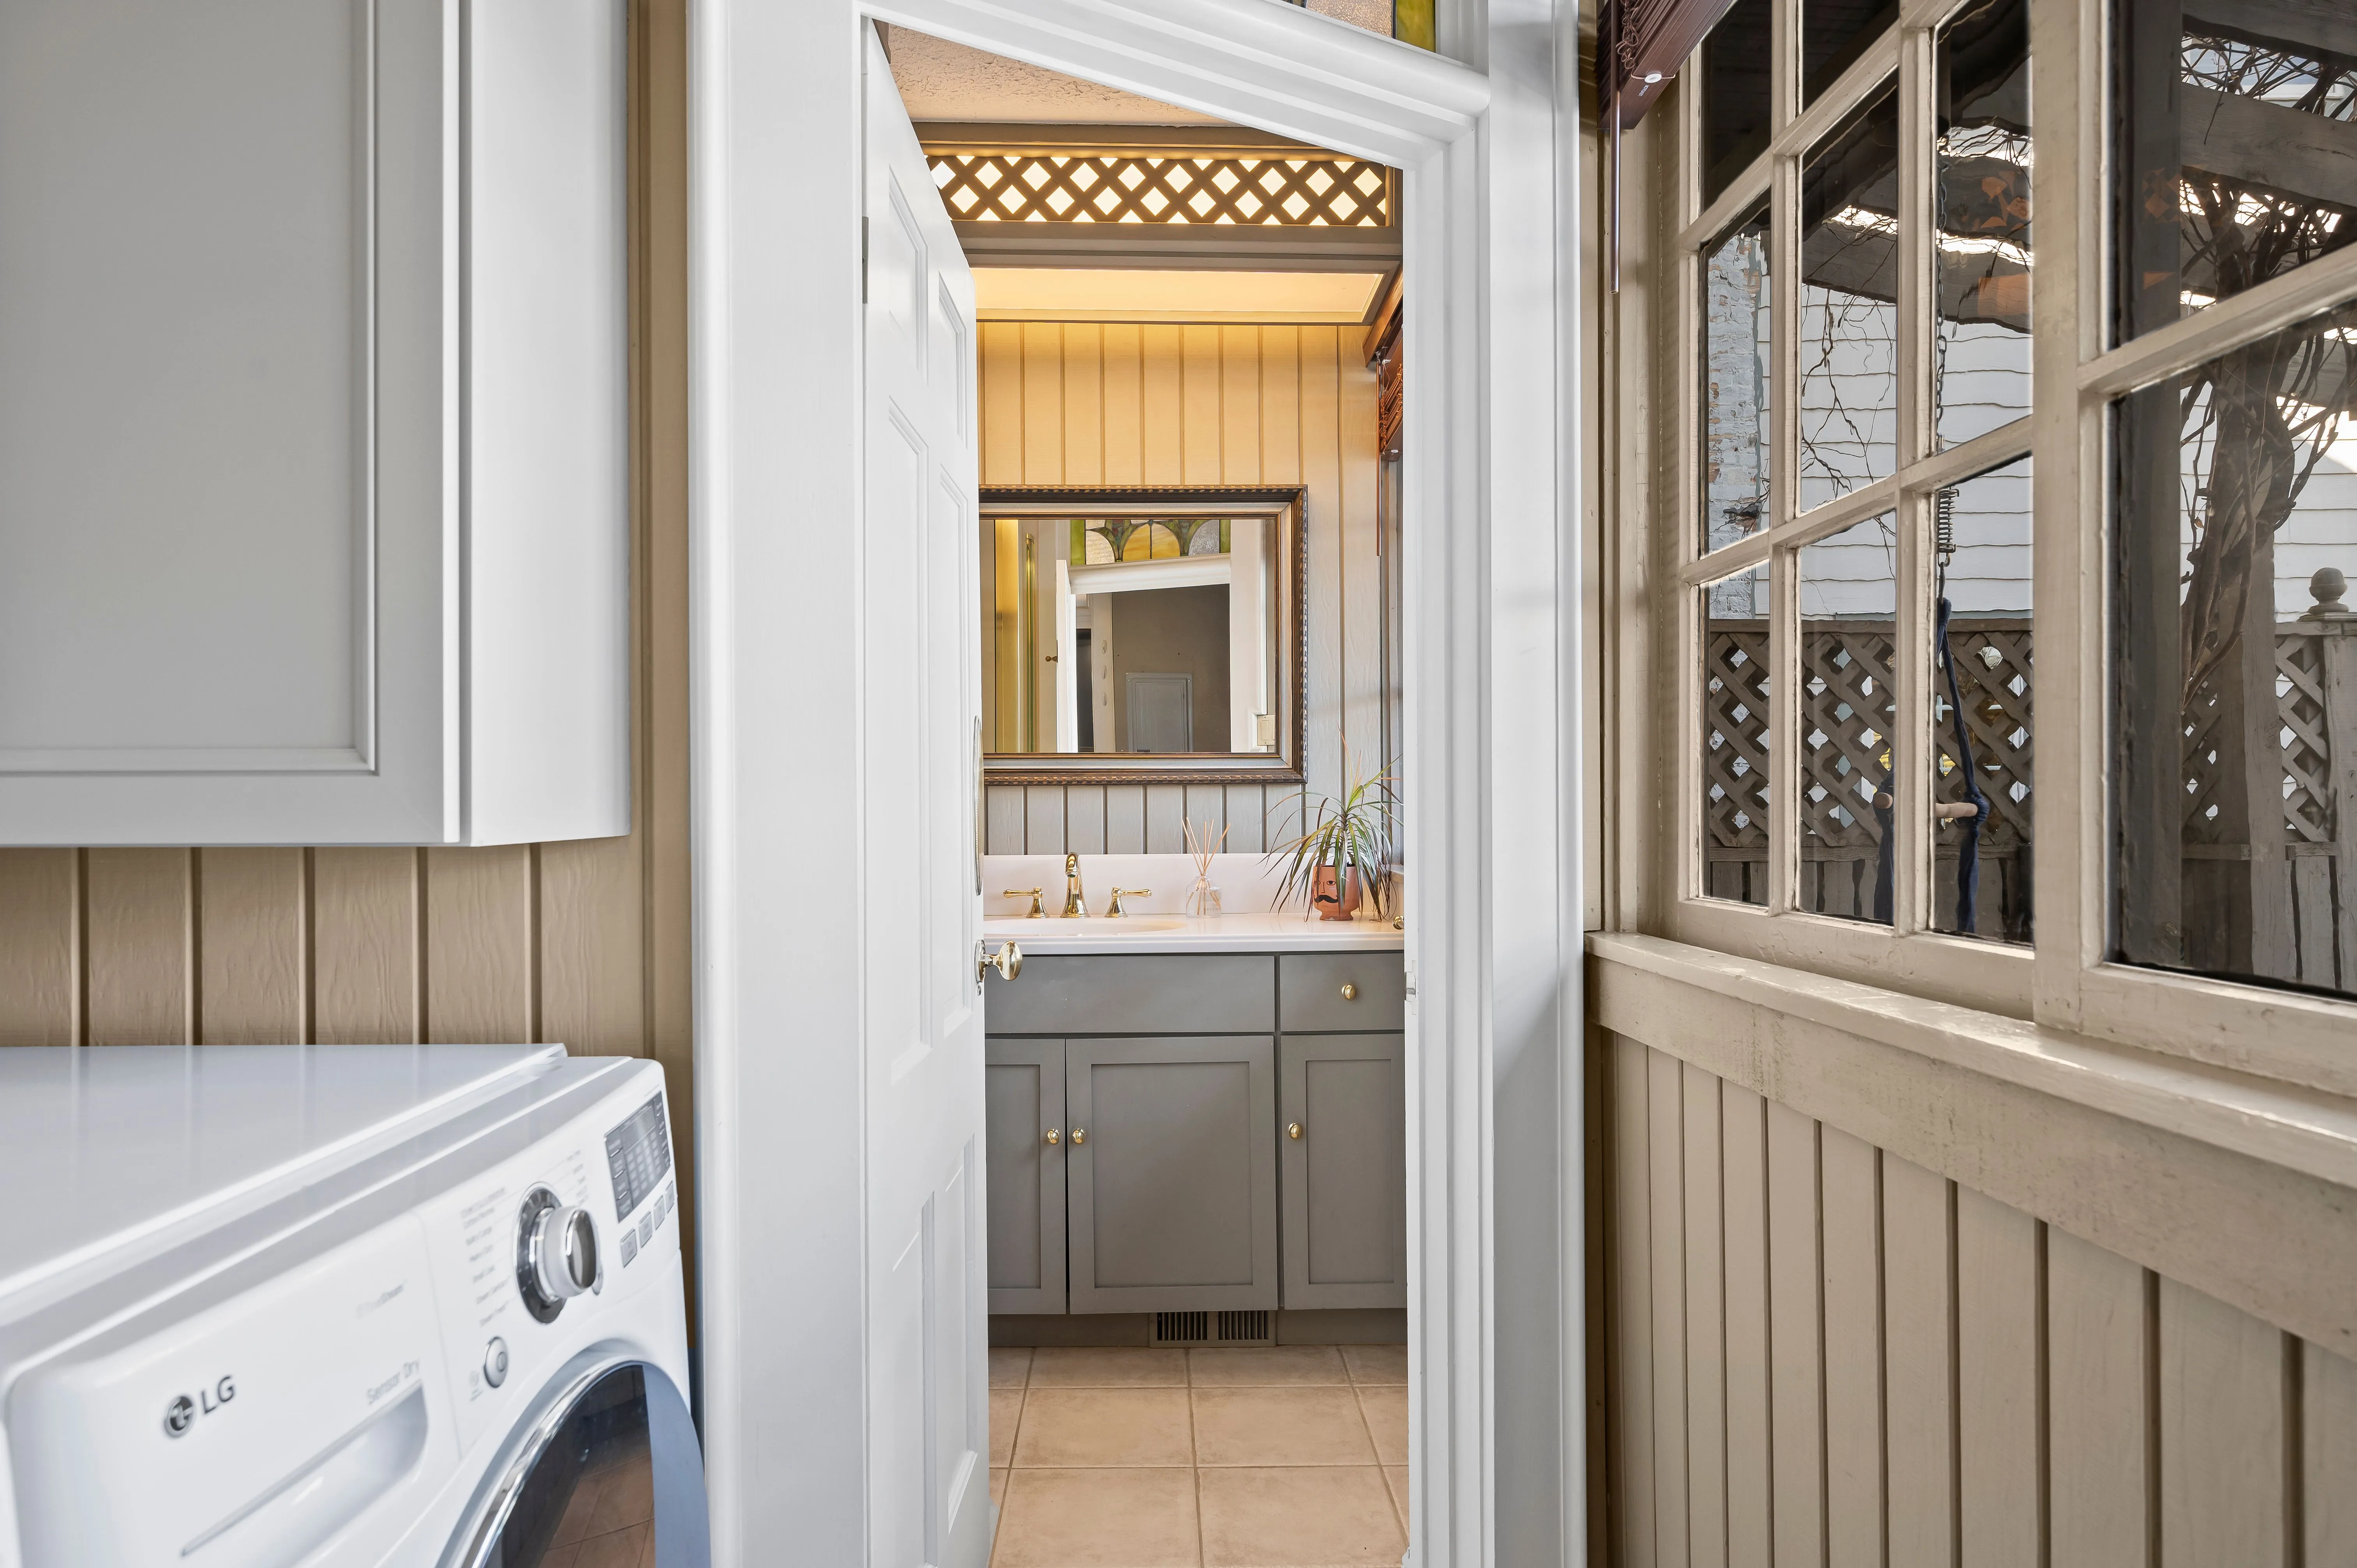 View from a laundry room with a white washing machine, through an open door leading to a well-lit kitchen.